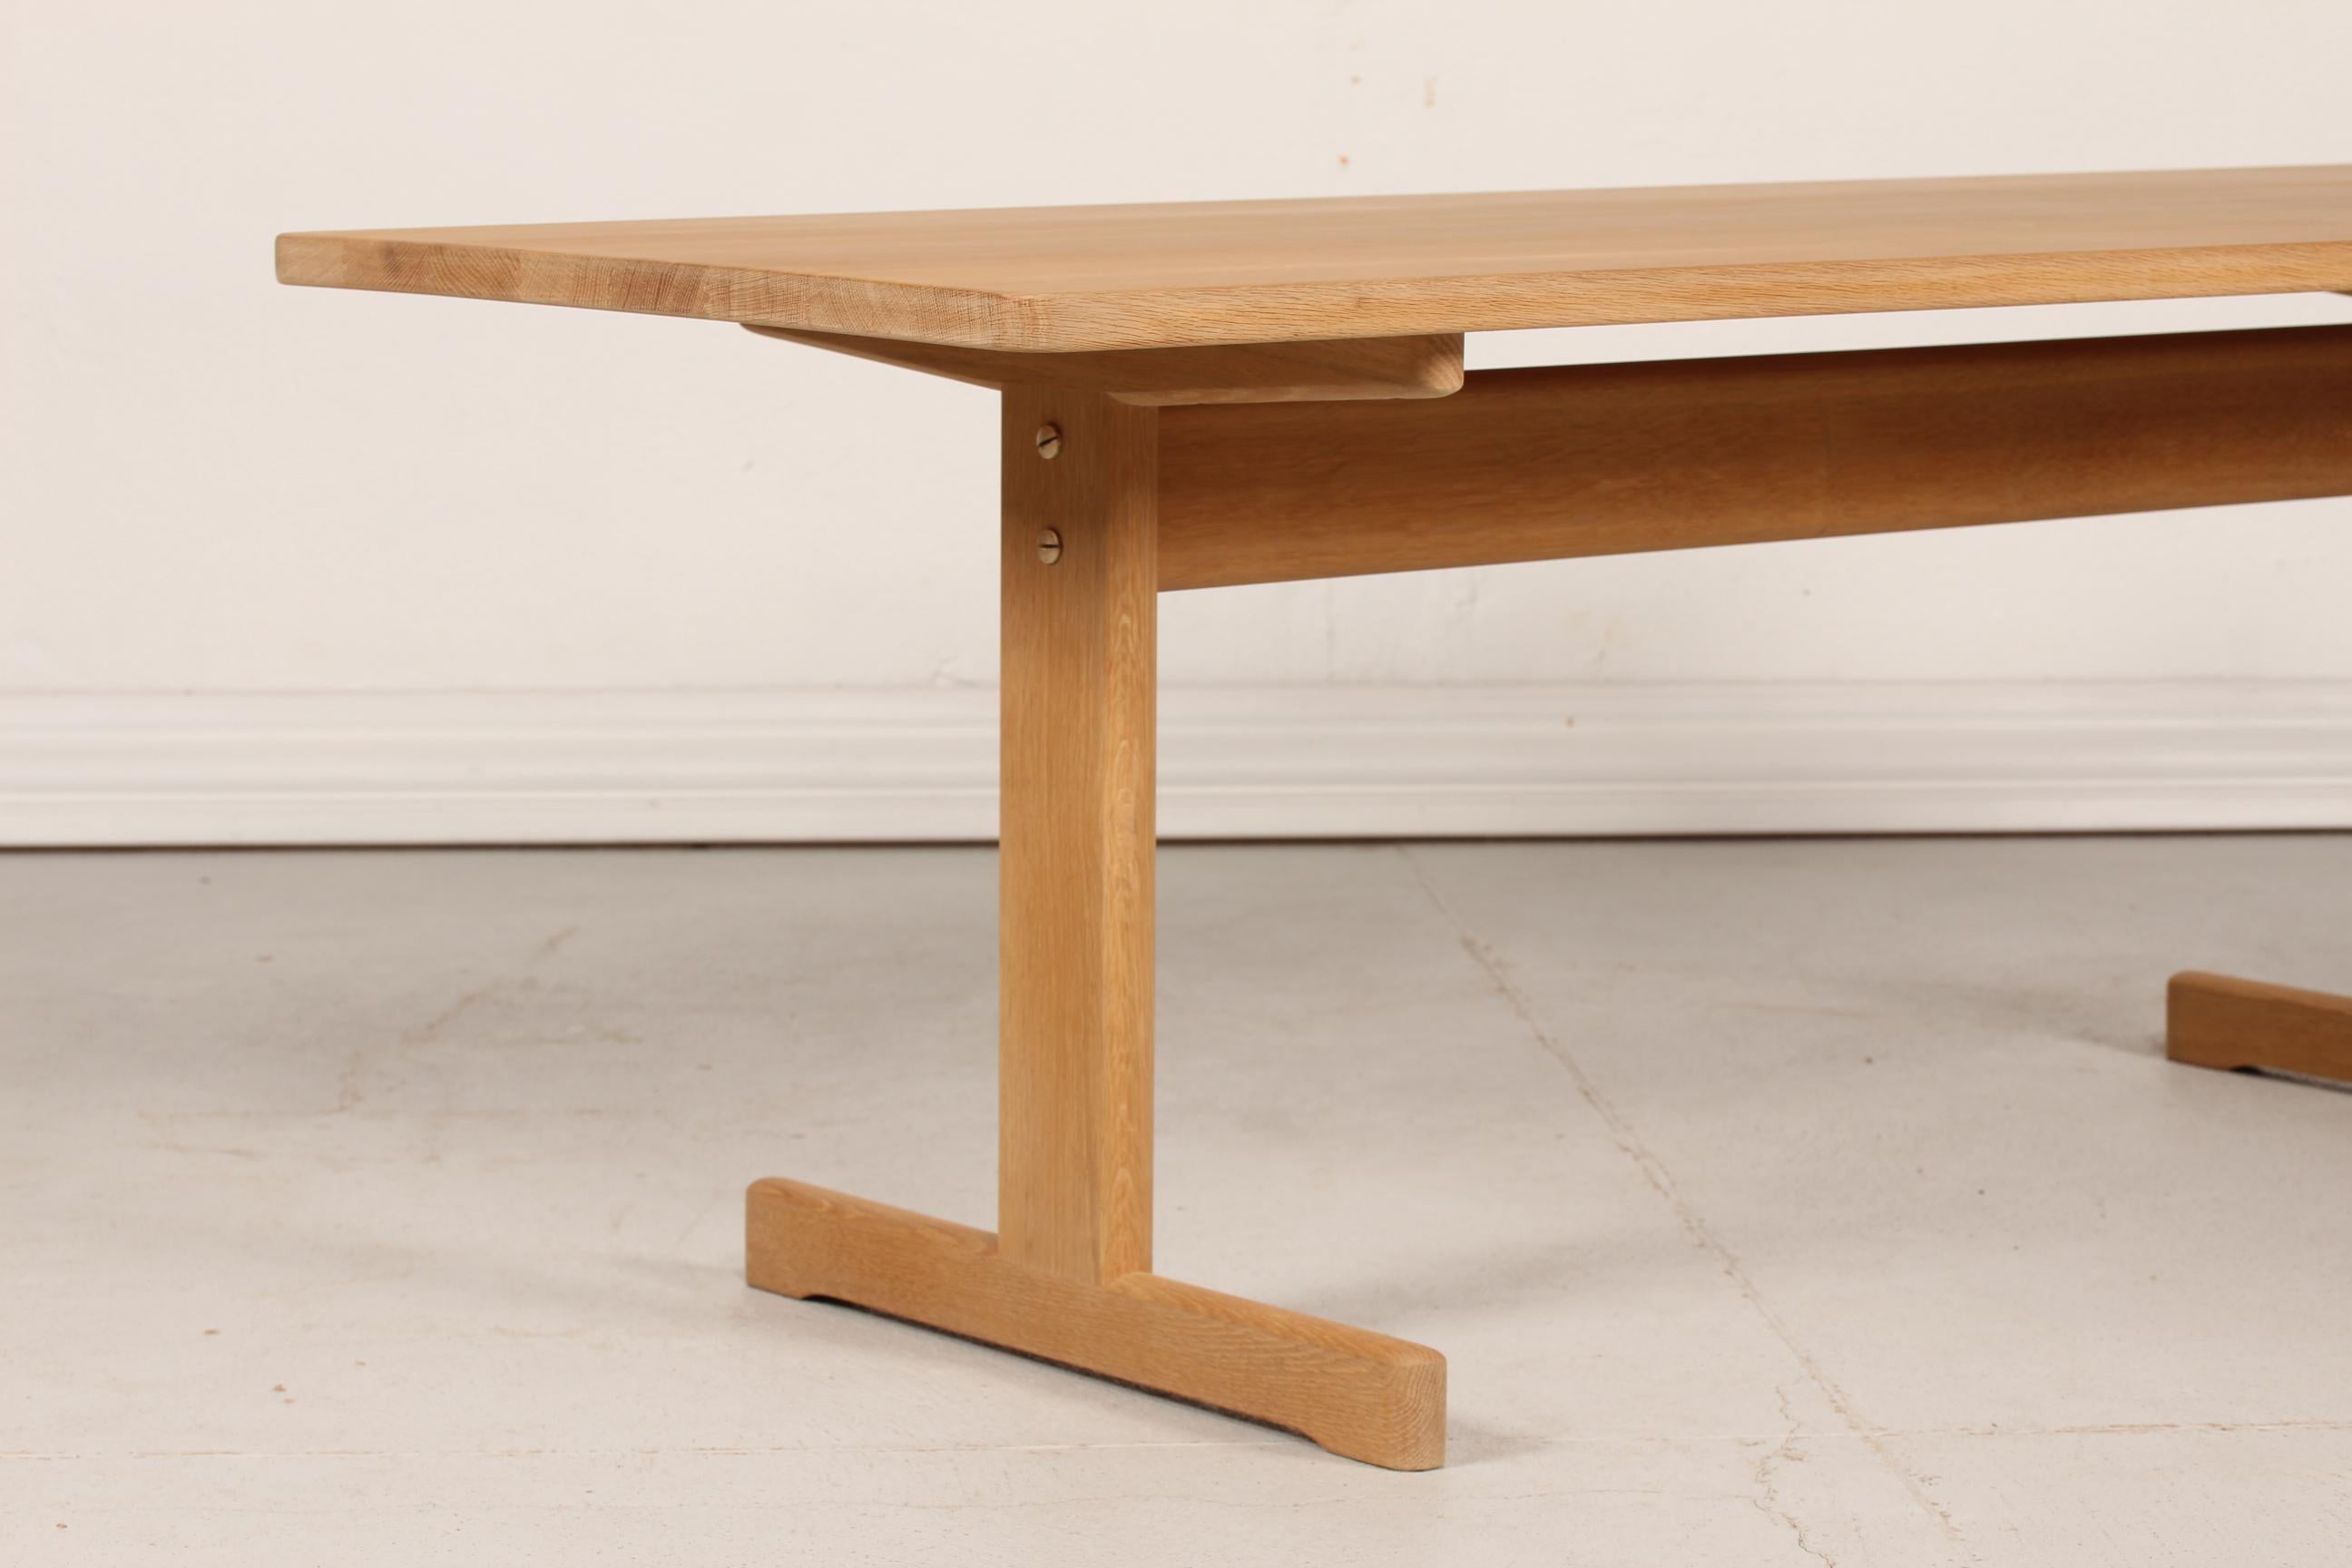 Danish vintage Børge Mogensen Shaker coffee table model 5269 made of solid oak with soap treatment.

The table is made in November 1967 by Fredericia Stolefabrik and remain in a very good vintage condition
without spots or other